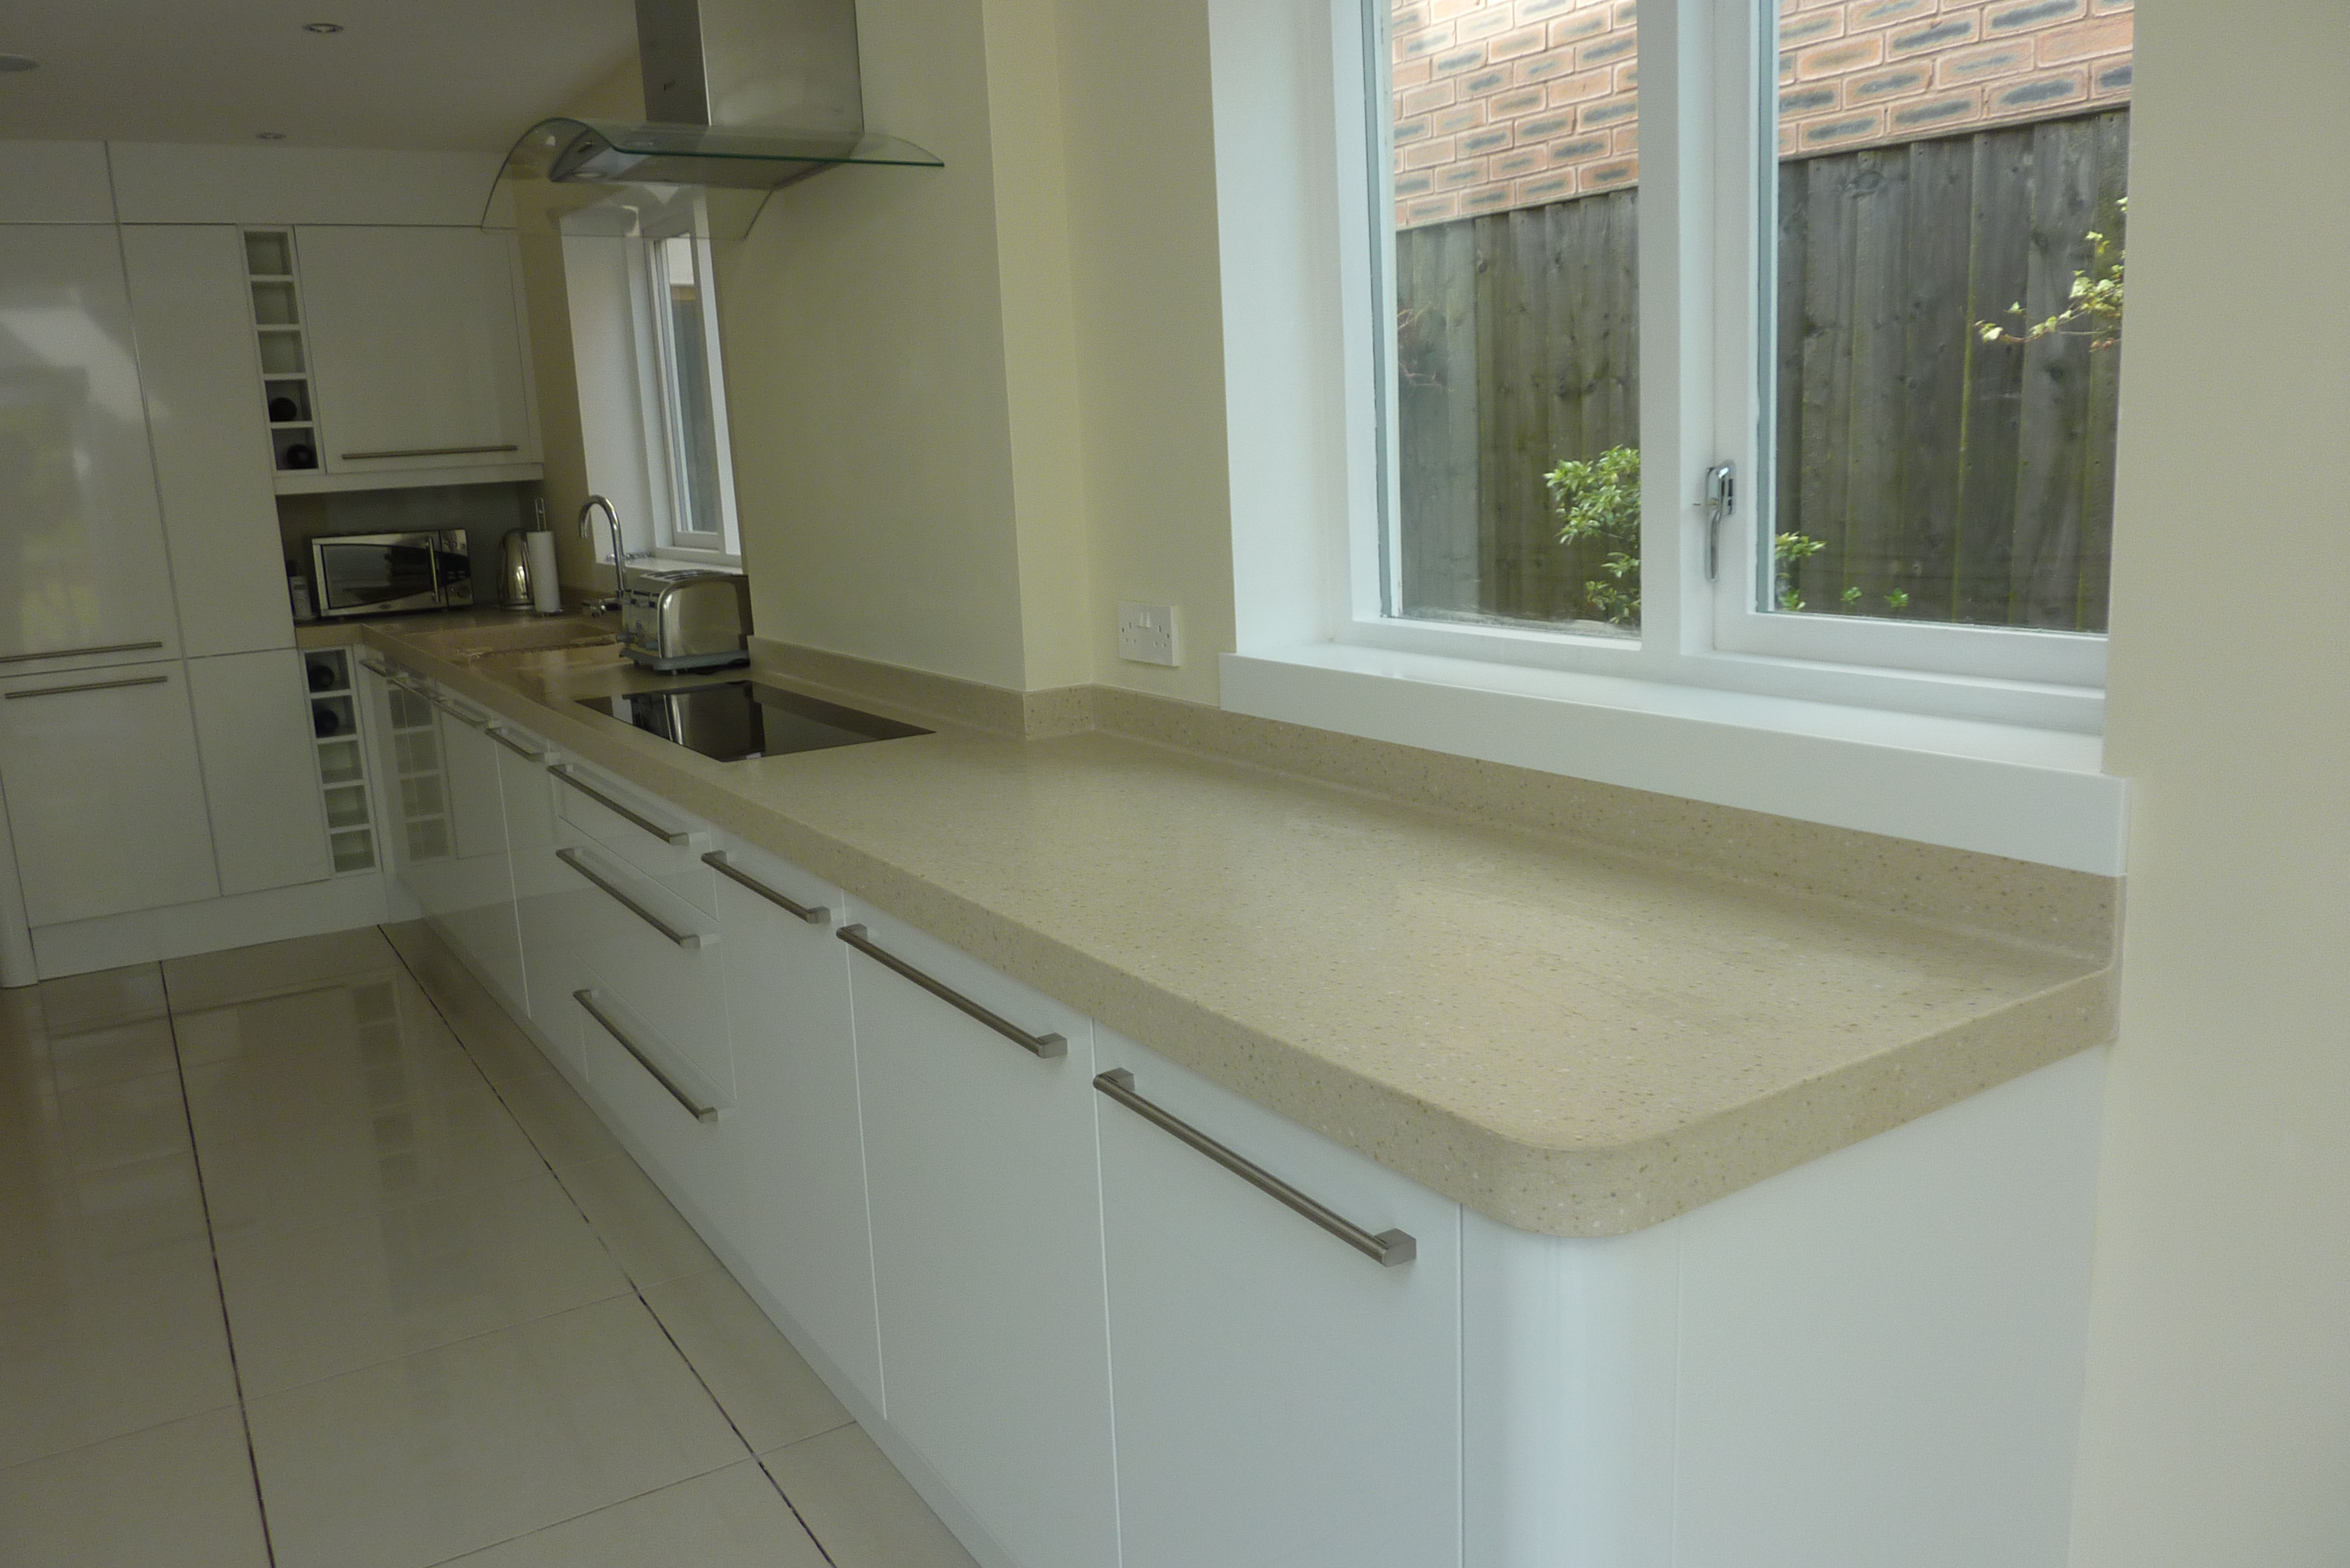 Corian worktops with coved up stands and inset corian sink and corian window sills